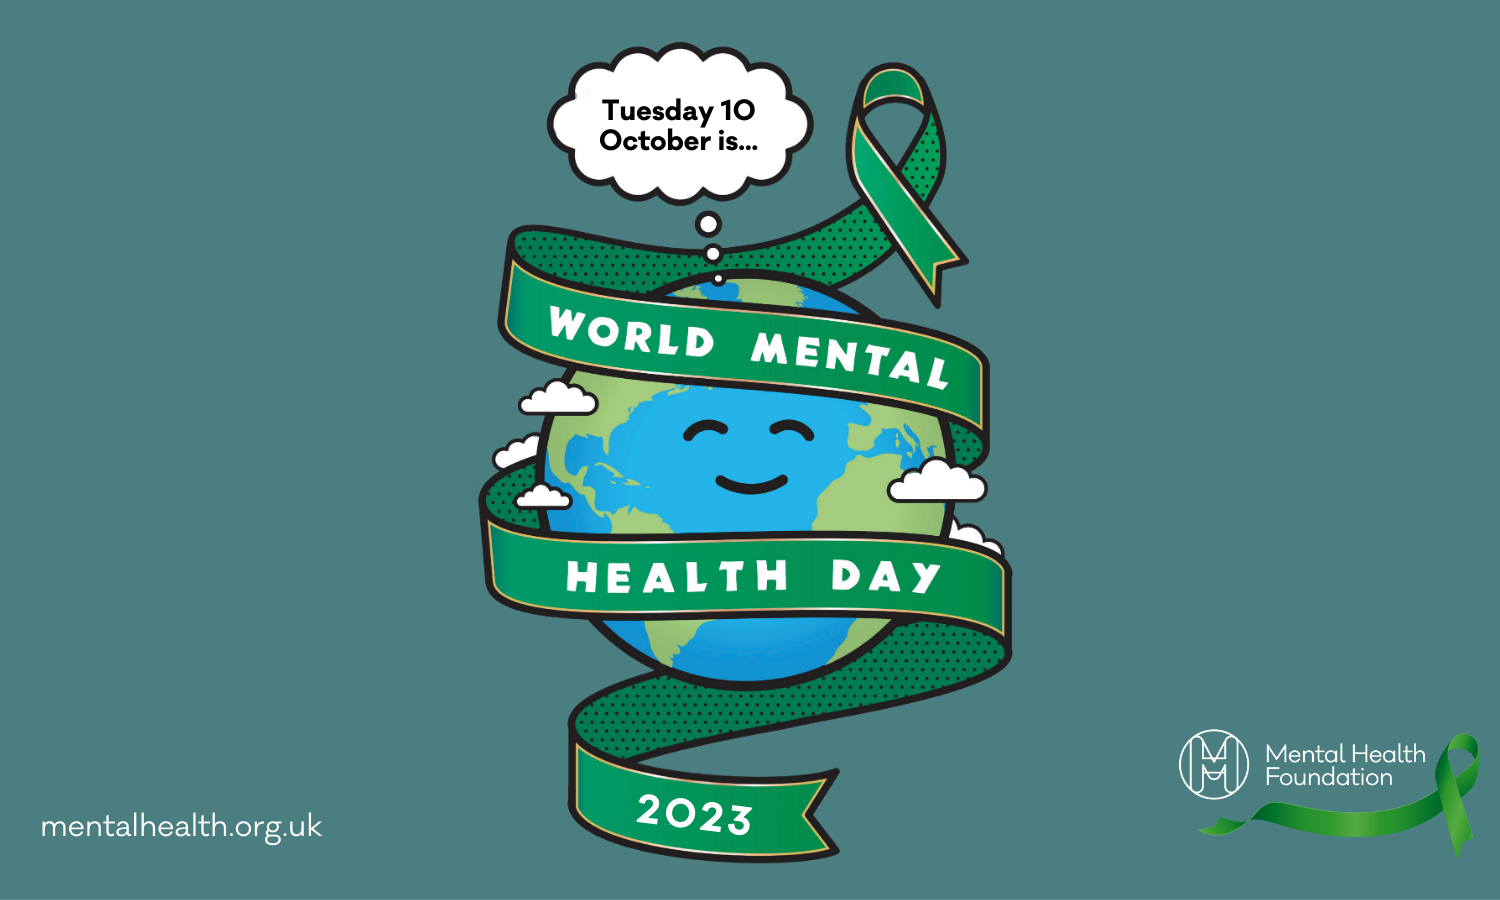 Green background with an illustrated smiling globe. Text reads "Tuesday 10 October is... World Mental Health Day 2023